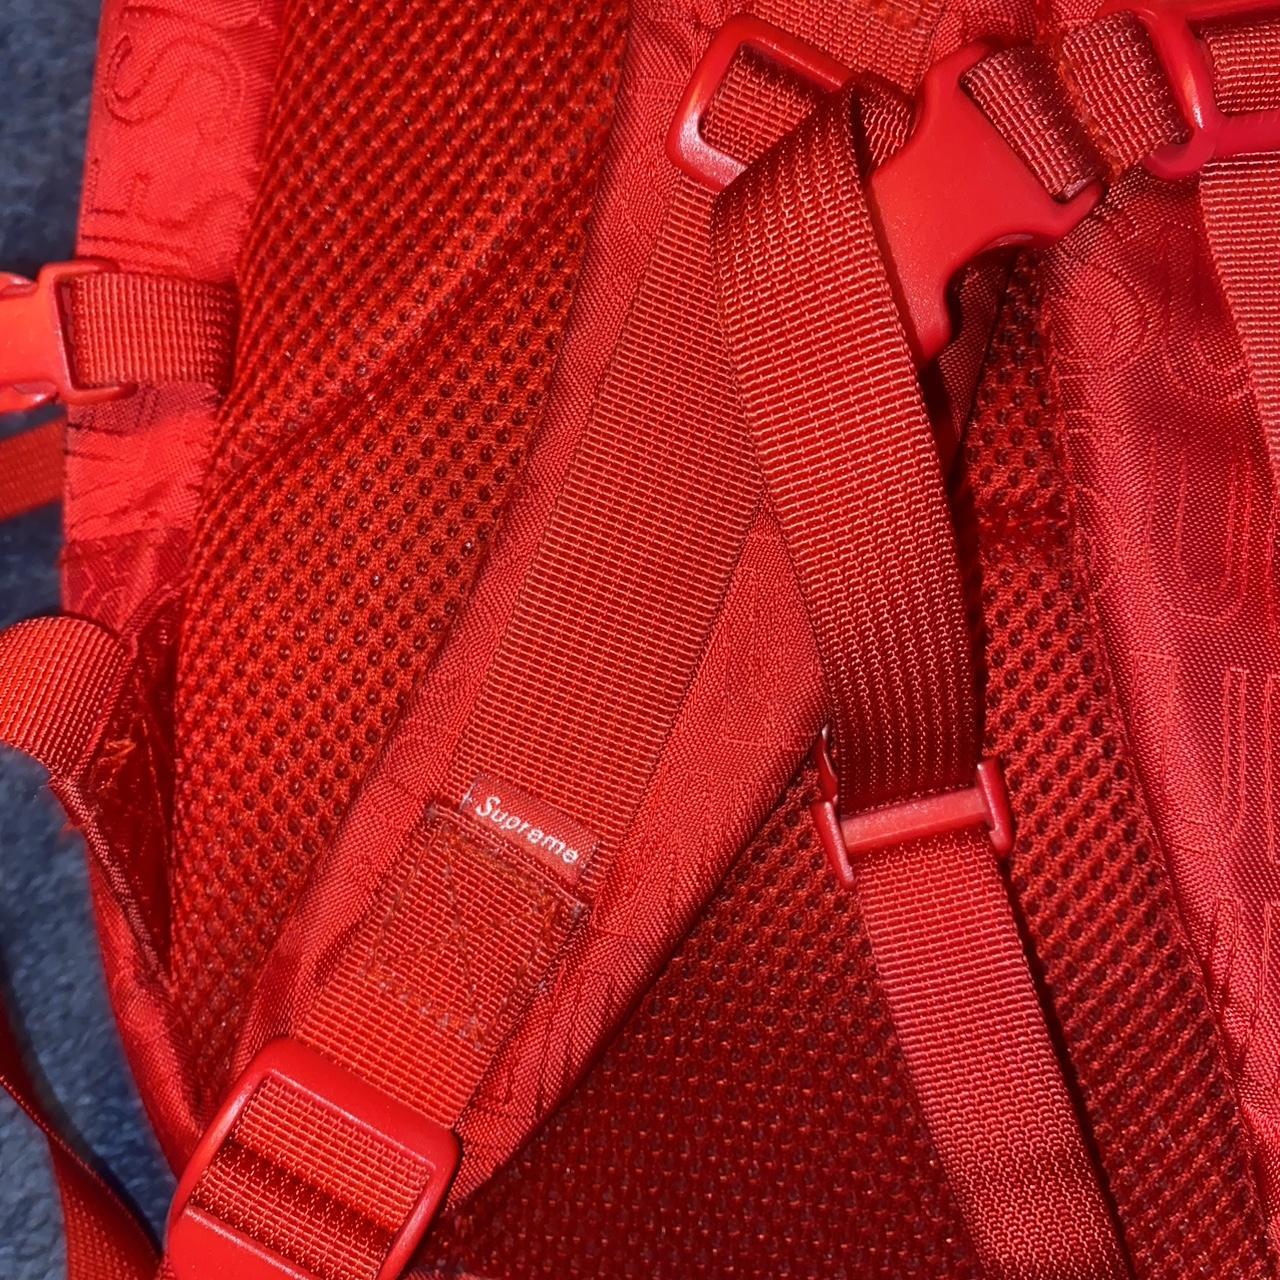 Supreme Backpack SS19 Red